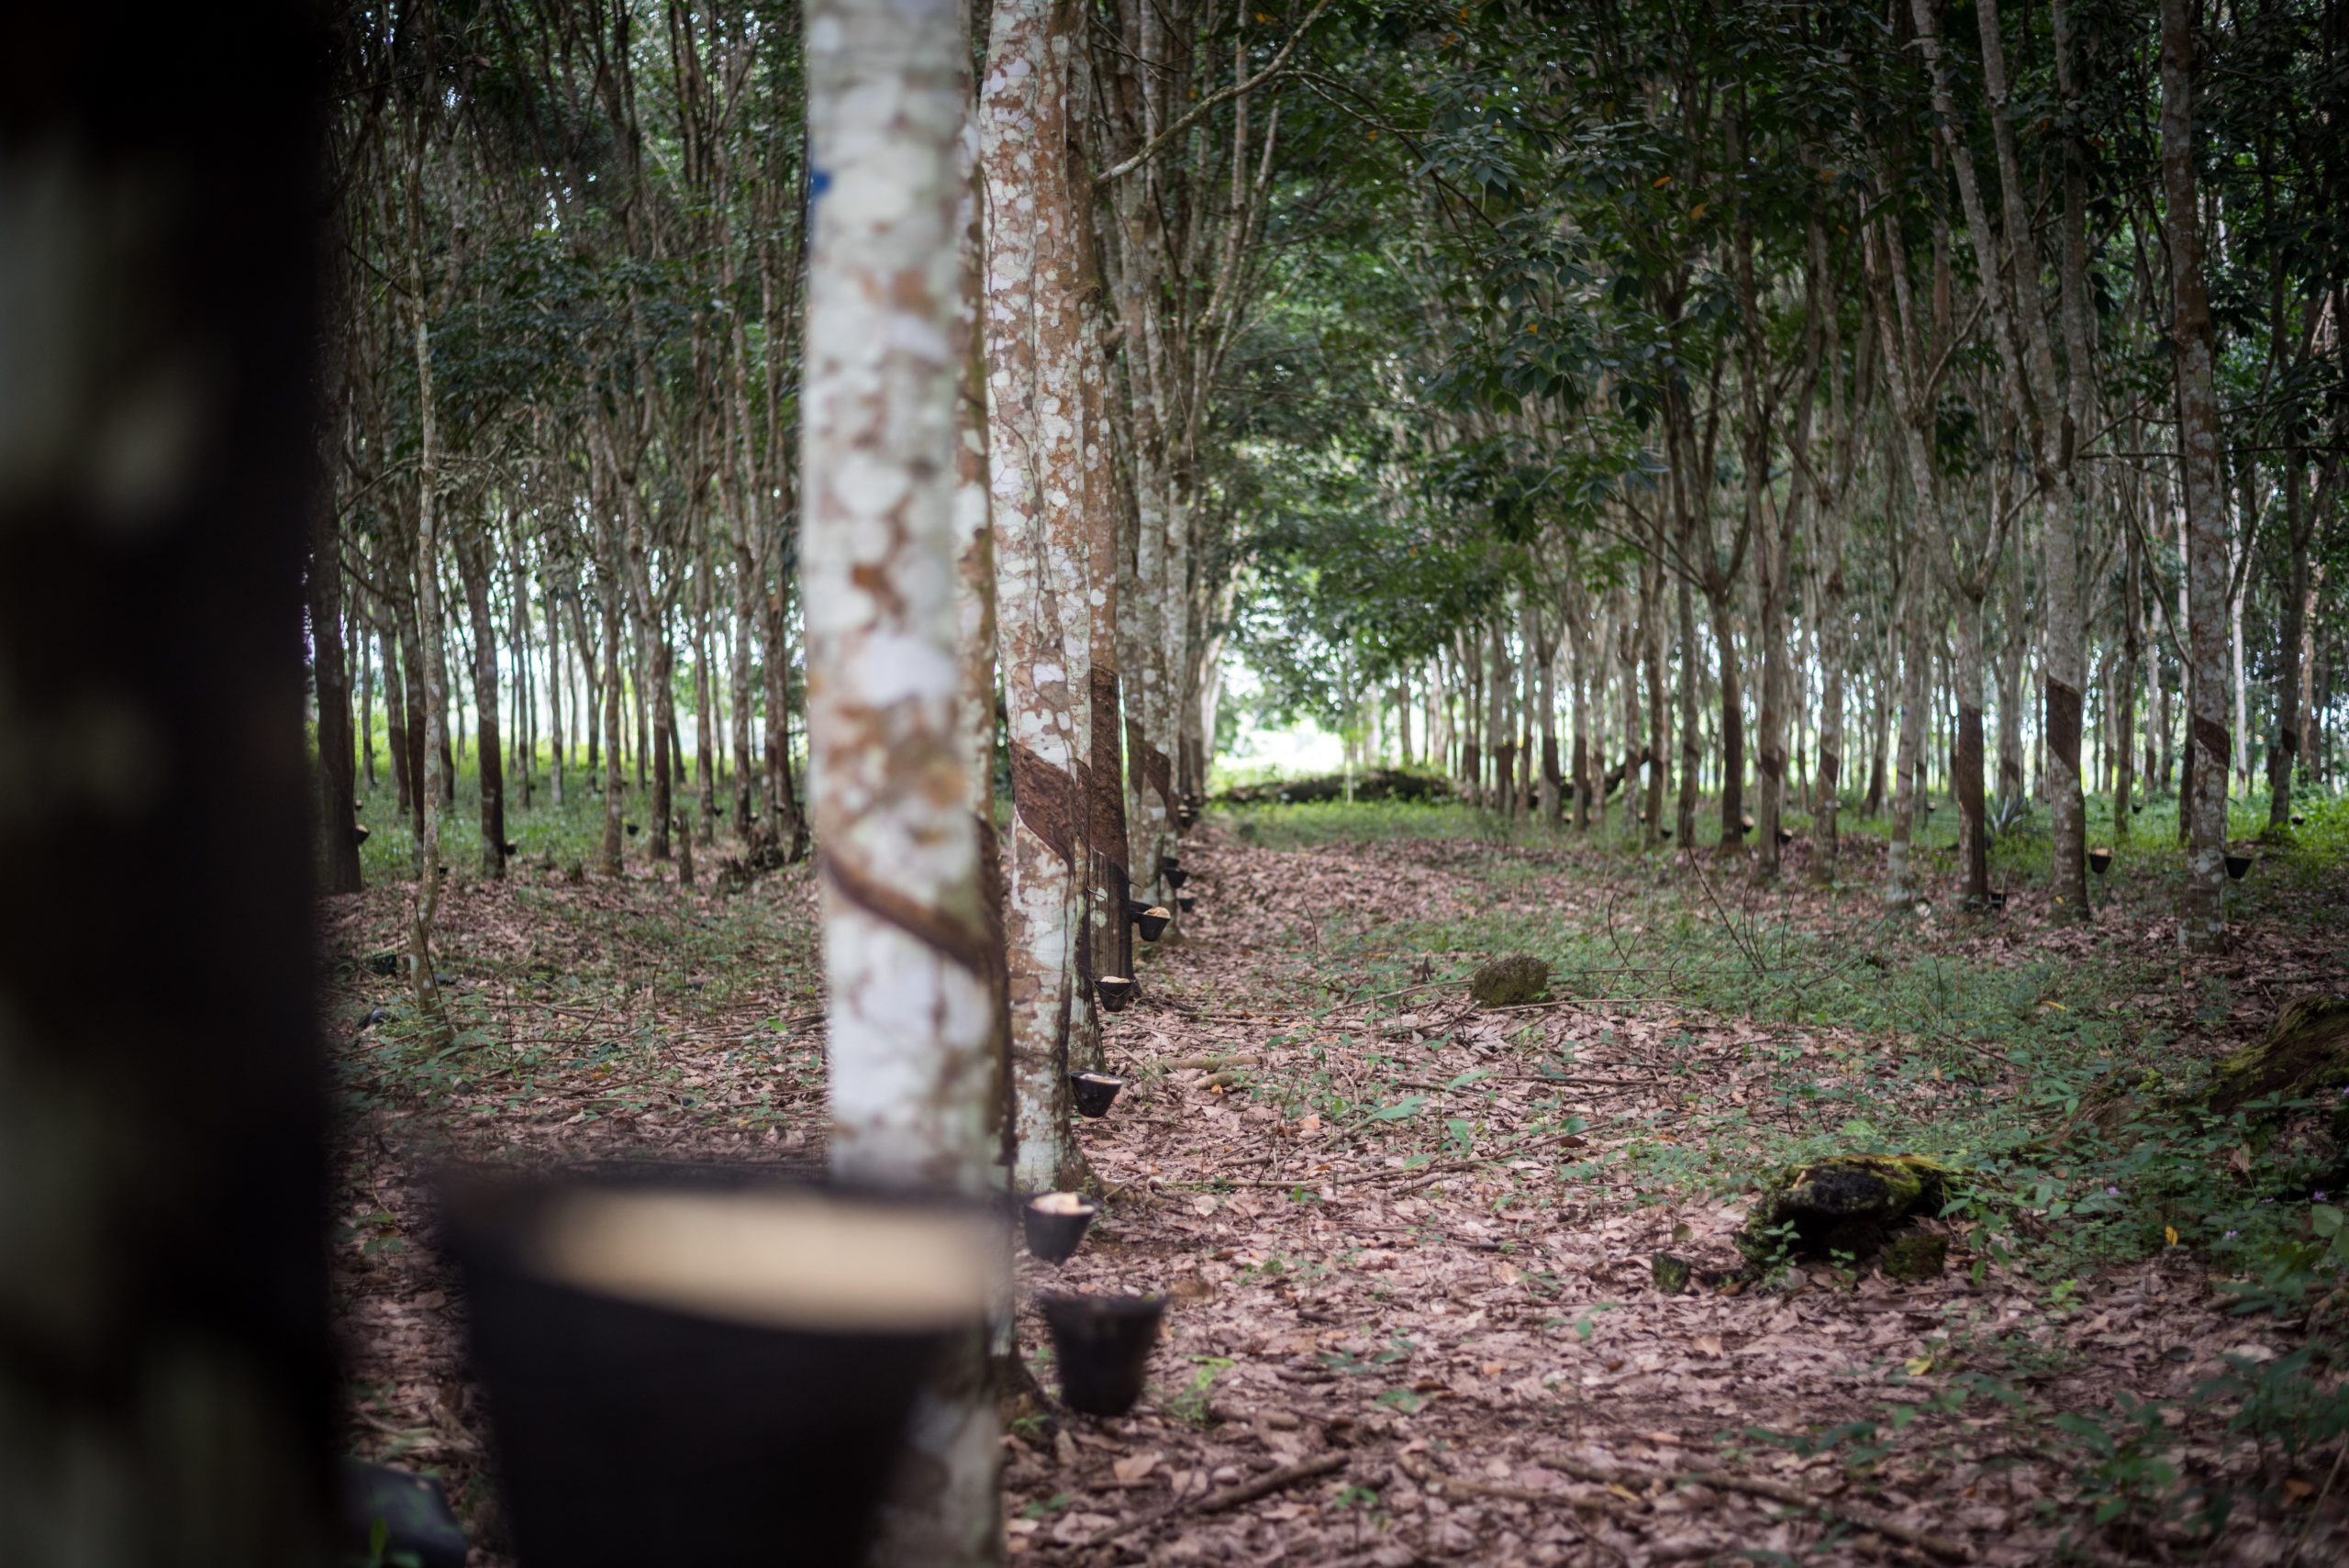 Why Rubber Must be Kept in the EU’s Anti-Deforestation Law